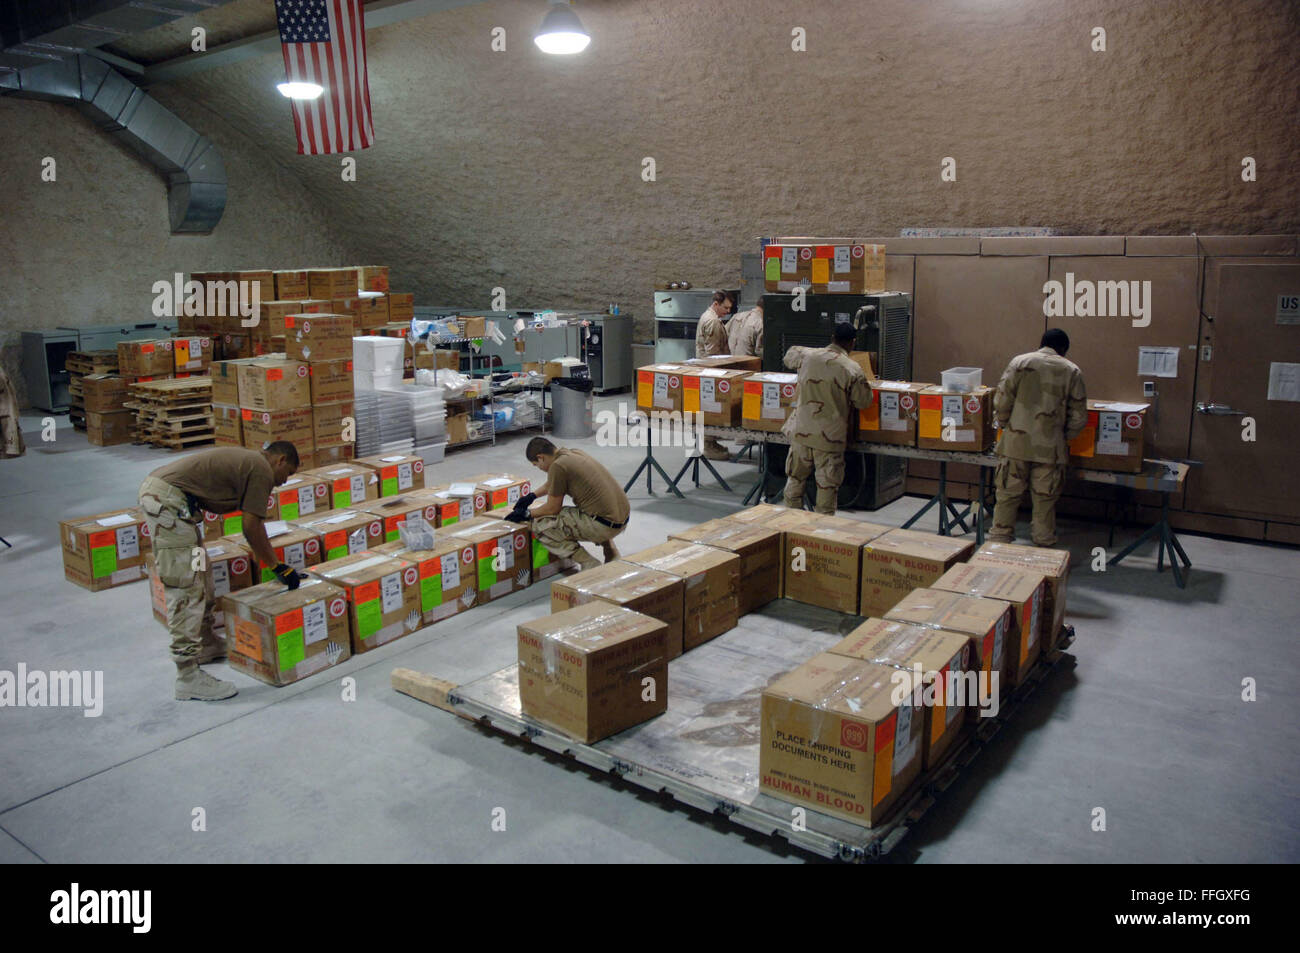 Members of the 379th Expeditionary Medical Support Flight blood transshipment center receive, log and prepare blood for shipment in Southwest Asia. The center gets blood from the U.S. and sends it throughout the region. Stock Photo